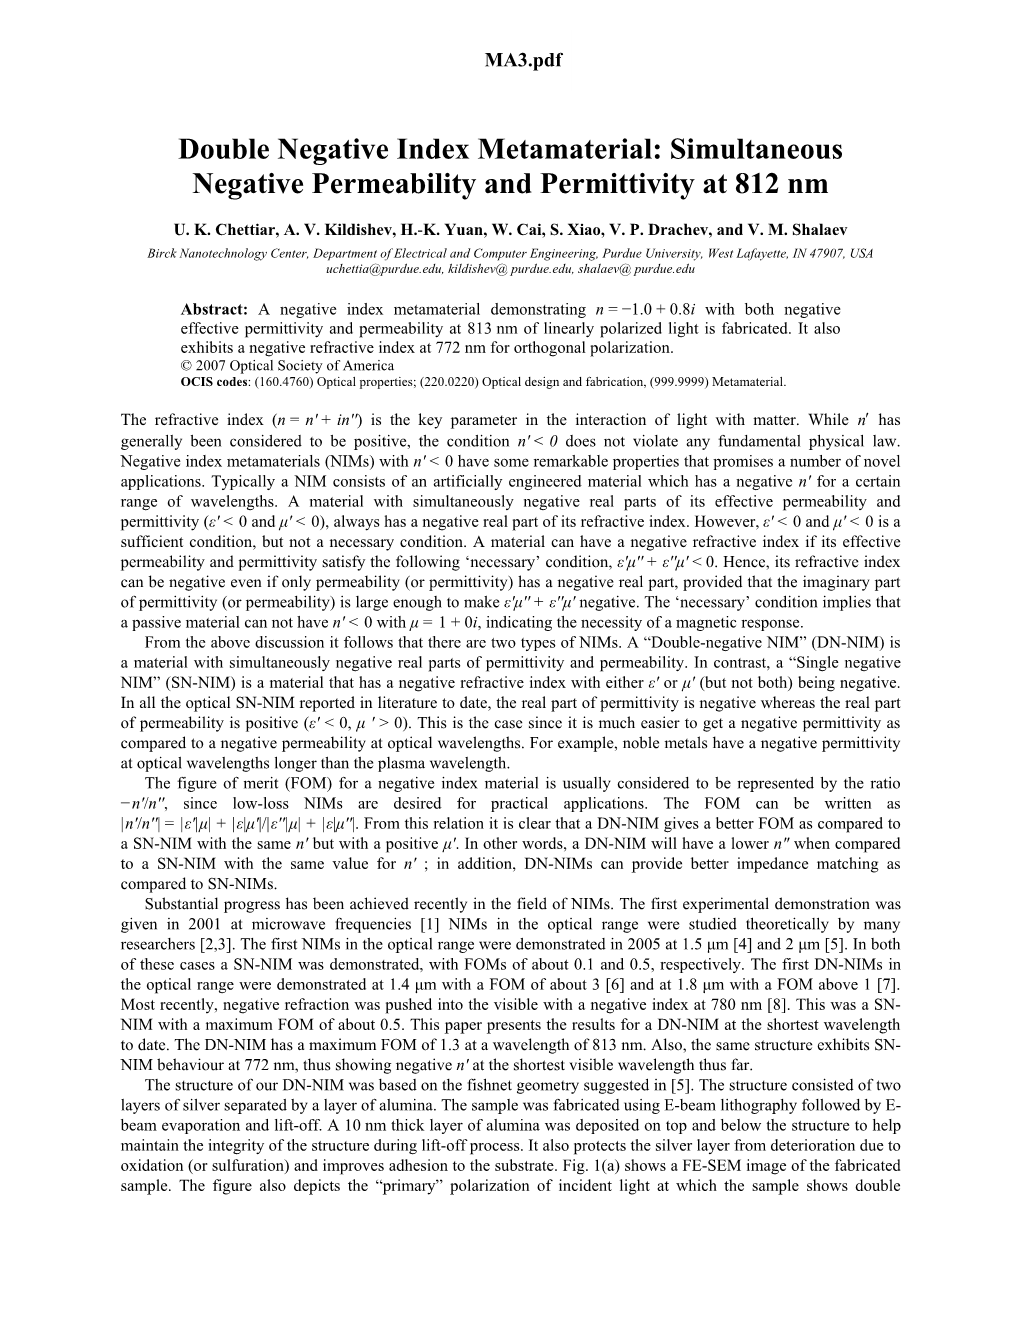 Simultaneous Negative Permeability and Permittivity at 812 Nm